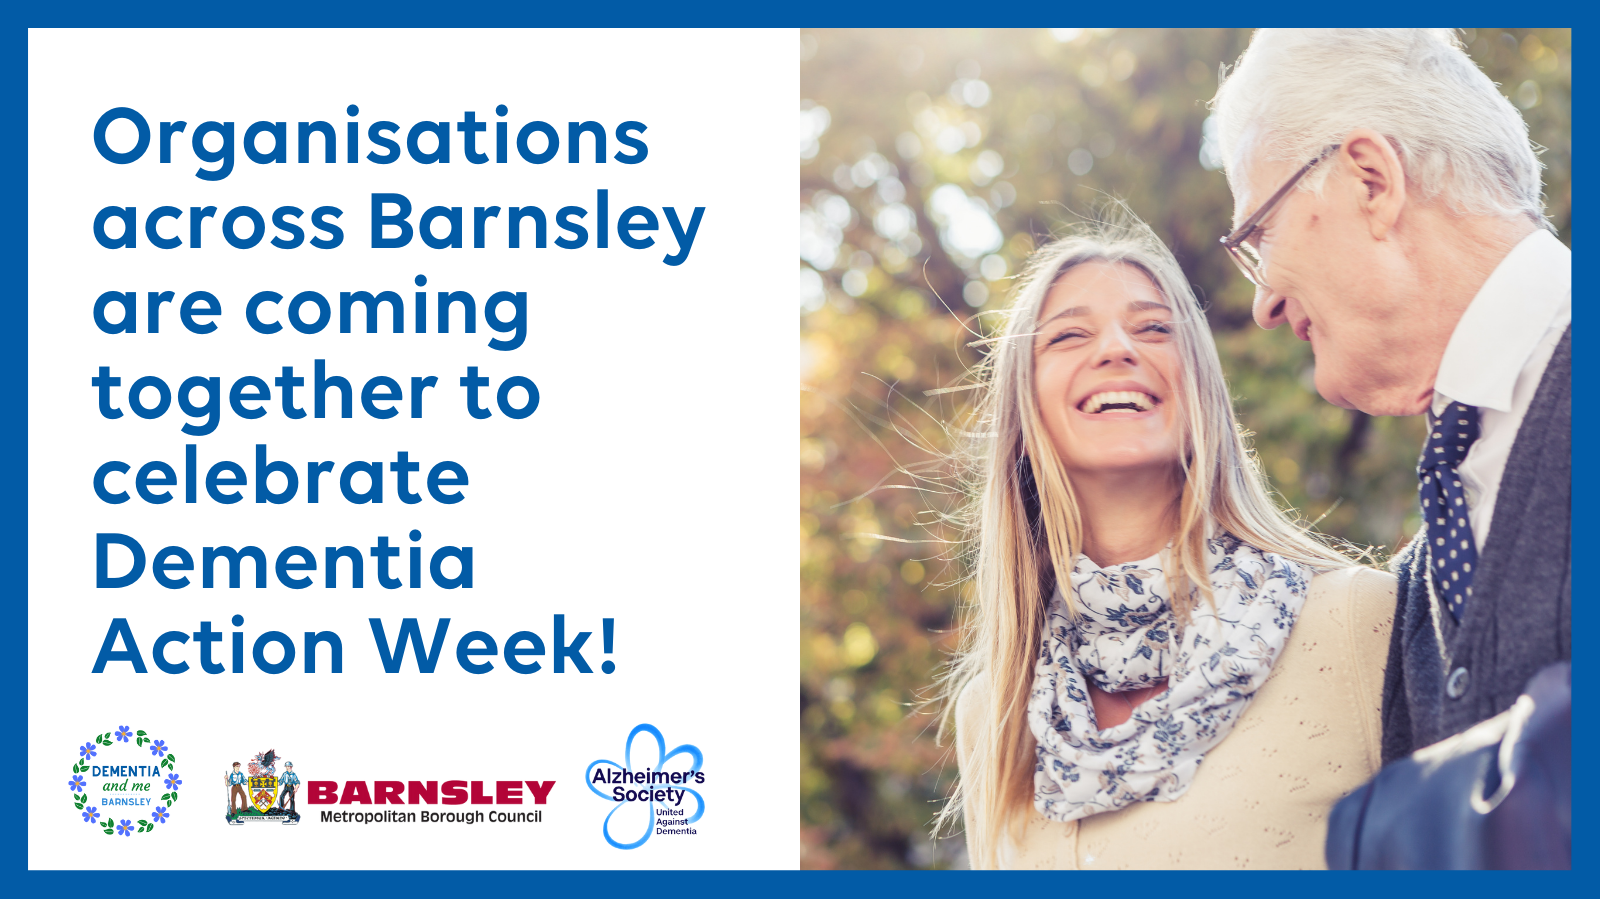 Organisations across Barnsley are coming together to celebrate dementia awareness week!